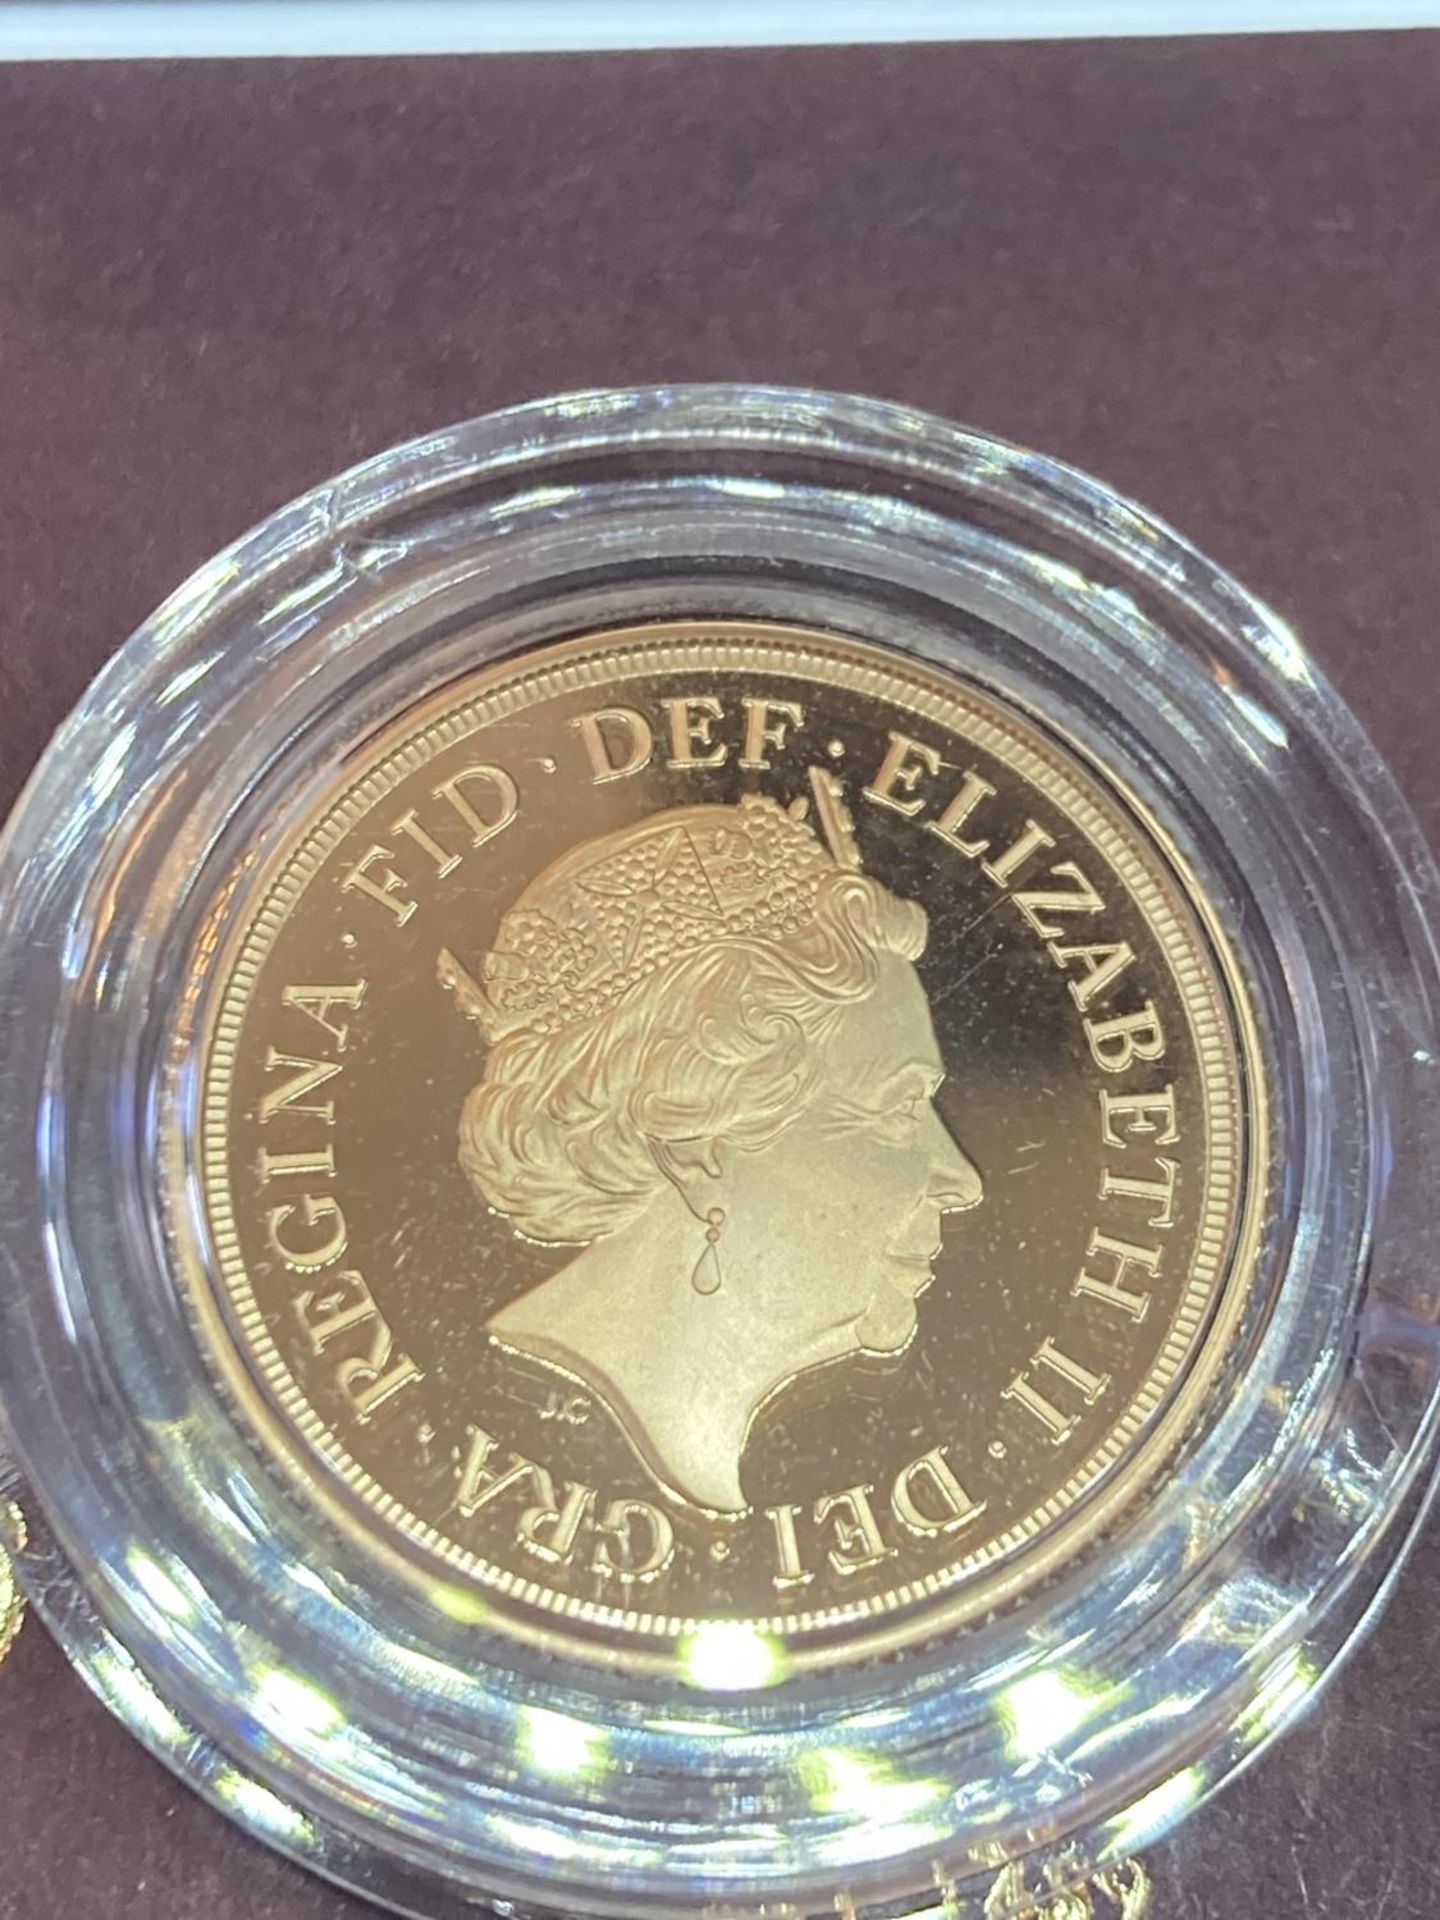 A 2019 THE SOVEREIGN GOLD PROOF LIMITED EDITION NUMBER 6,312 OF 9,500 IN A WOODEN BOXED CASE - Image 3 of 5